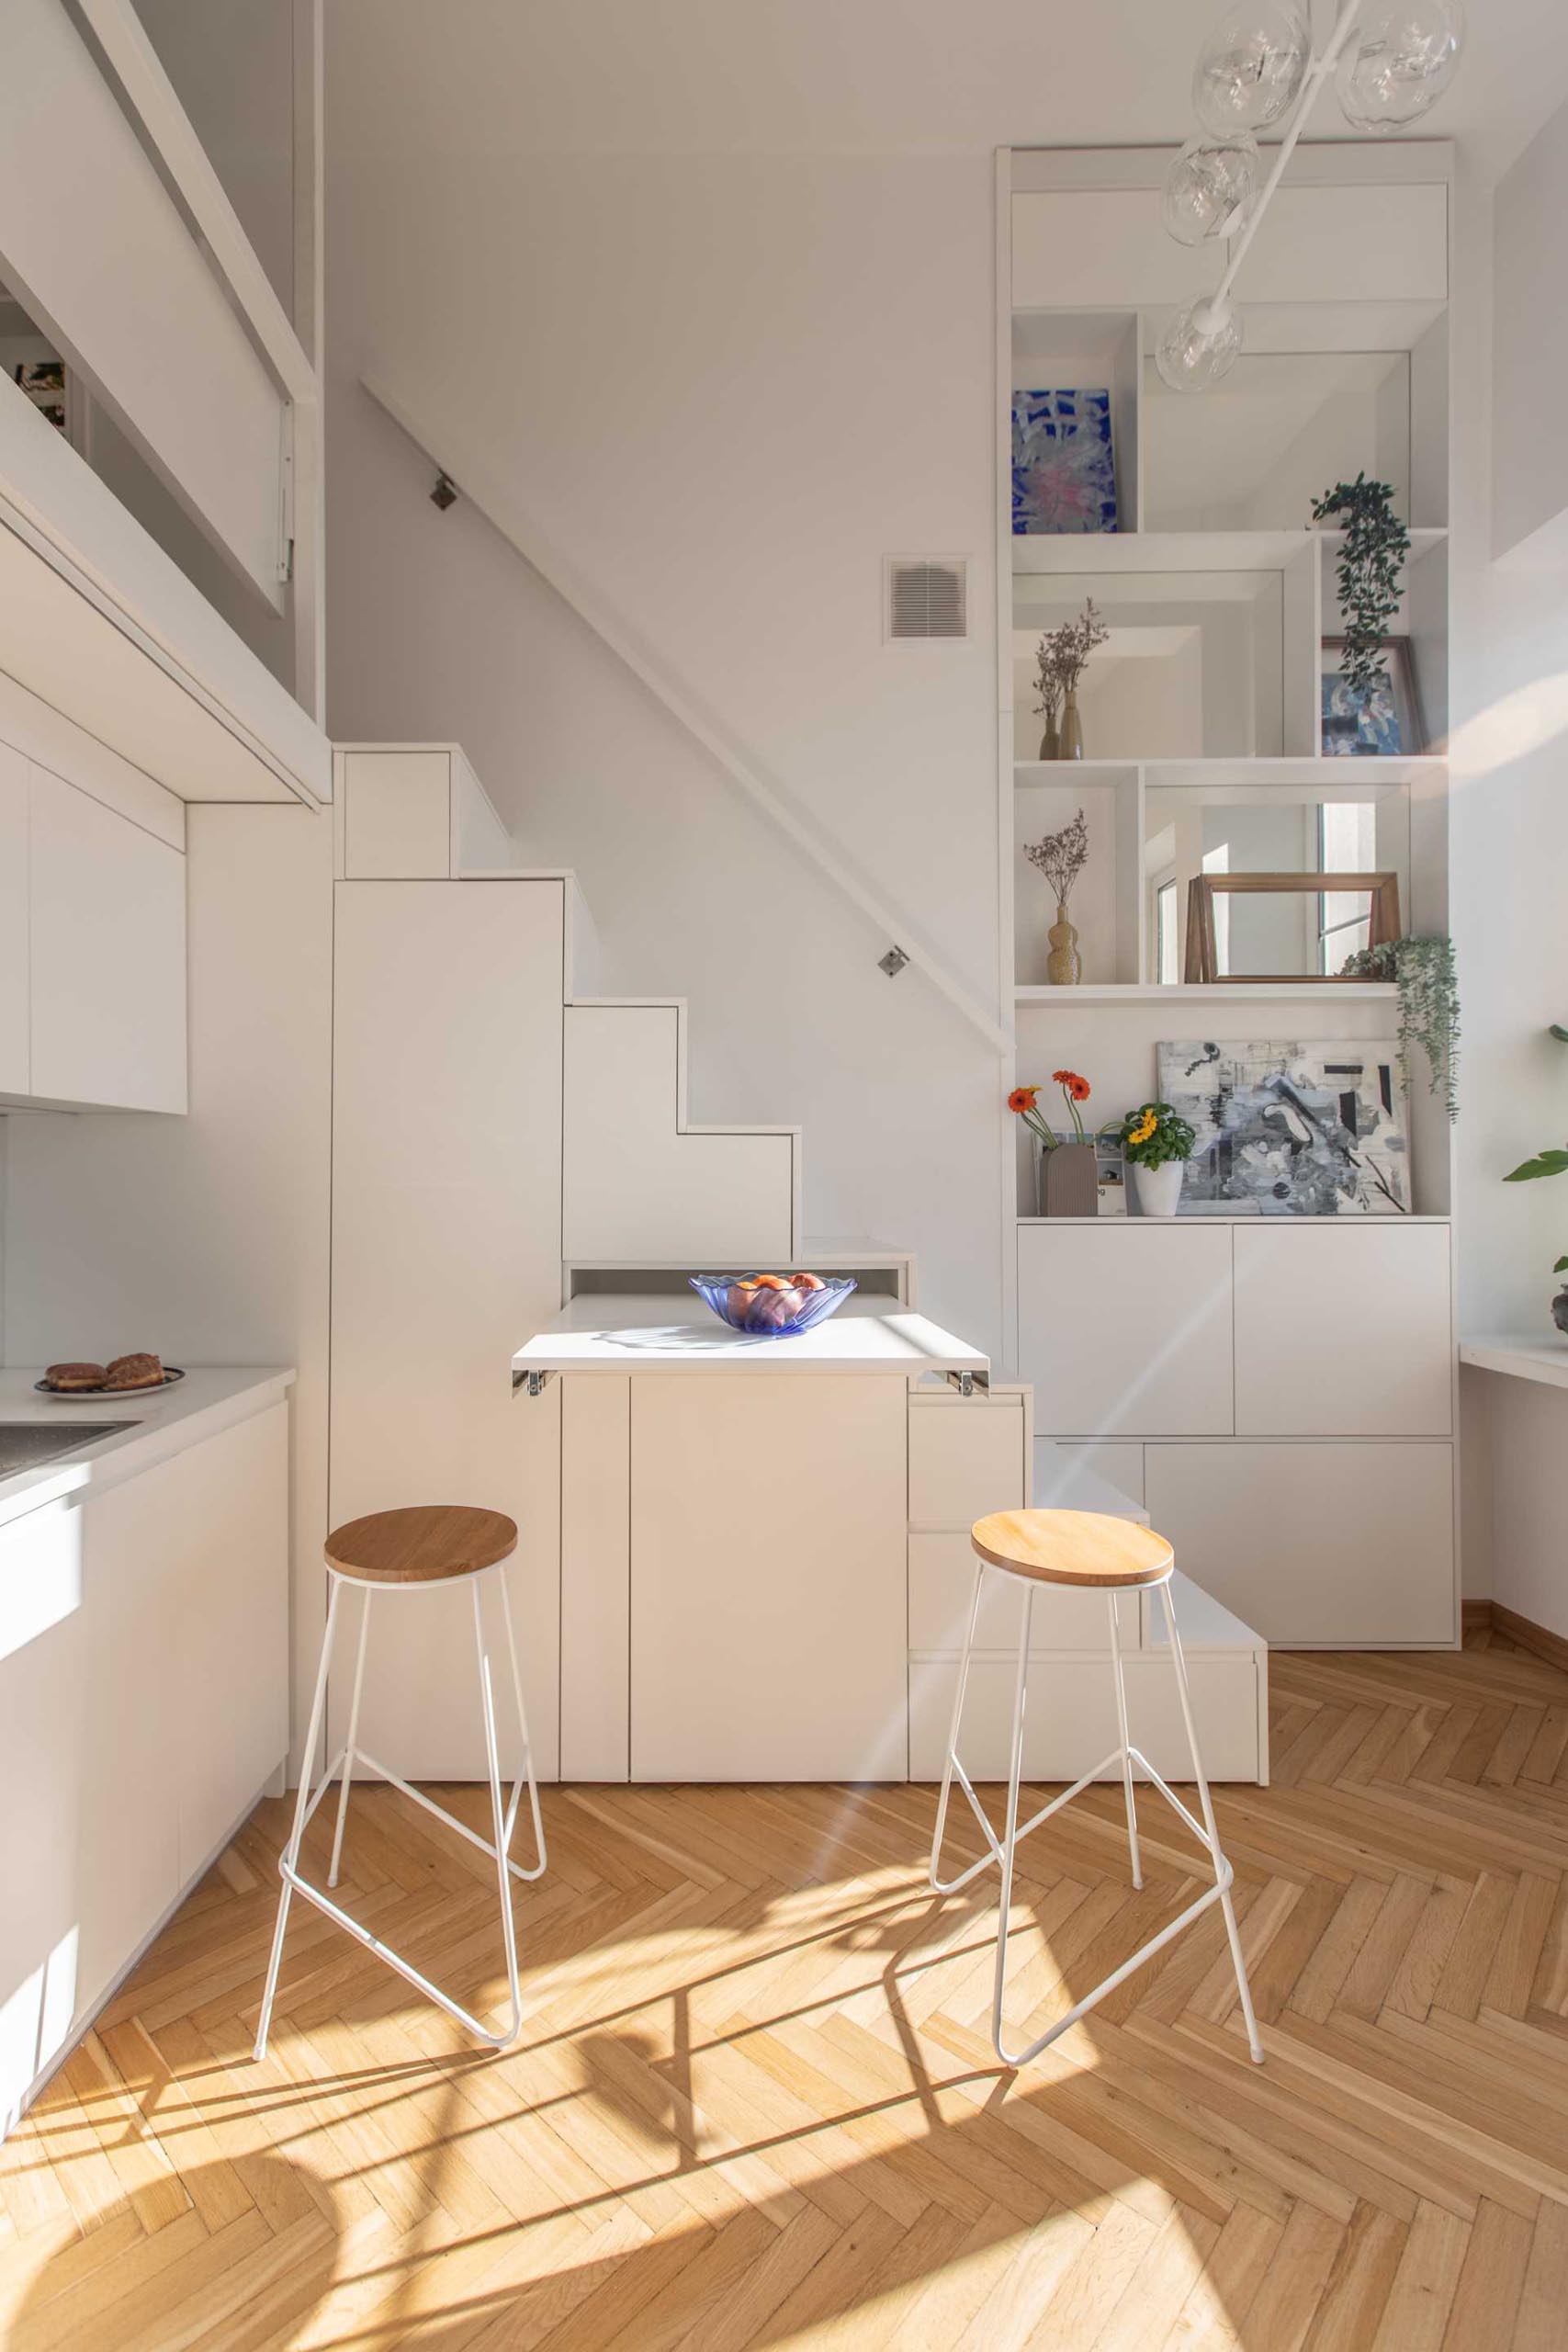 A small apartment has a pull-out table underneath the stairs that acts as a dining table or additional countertop.